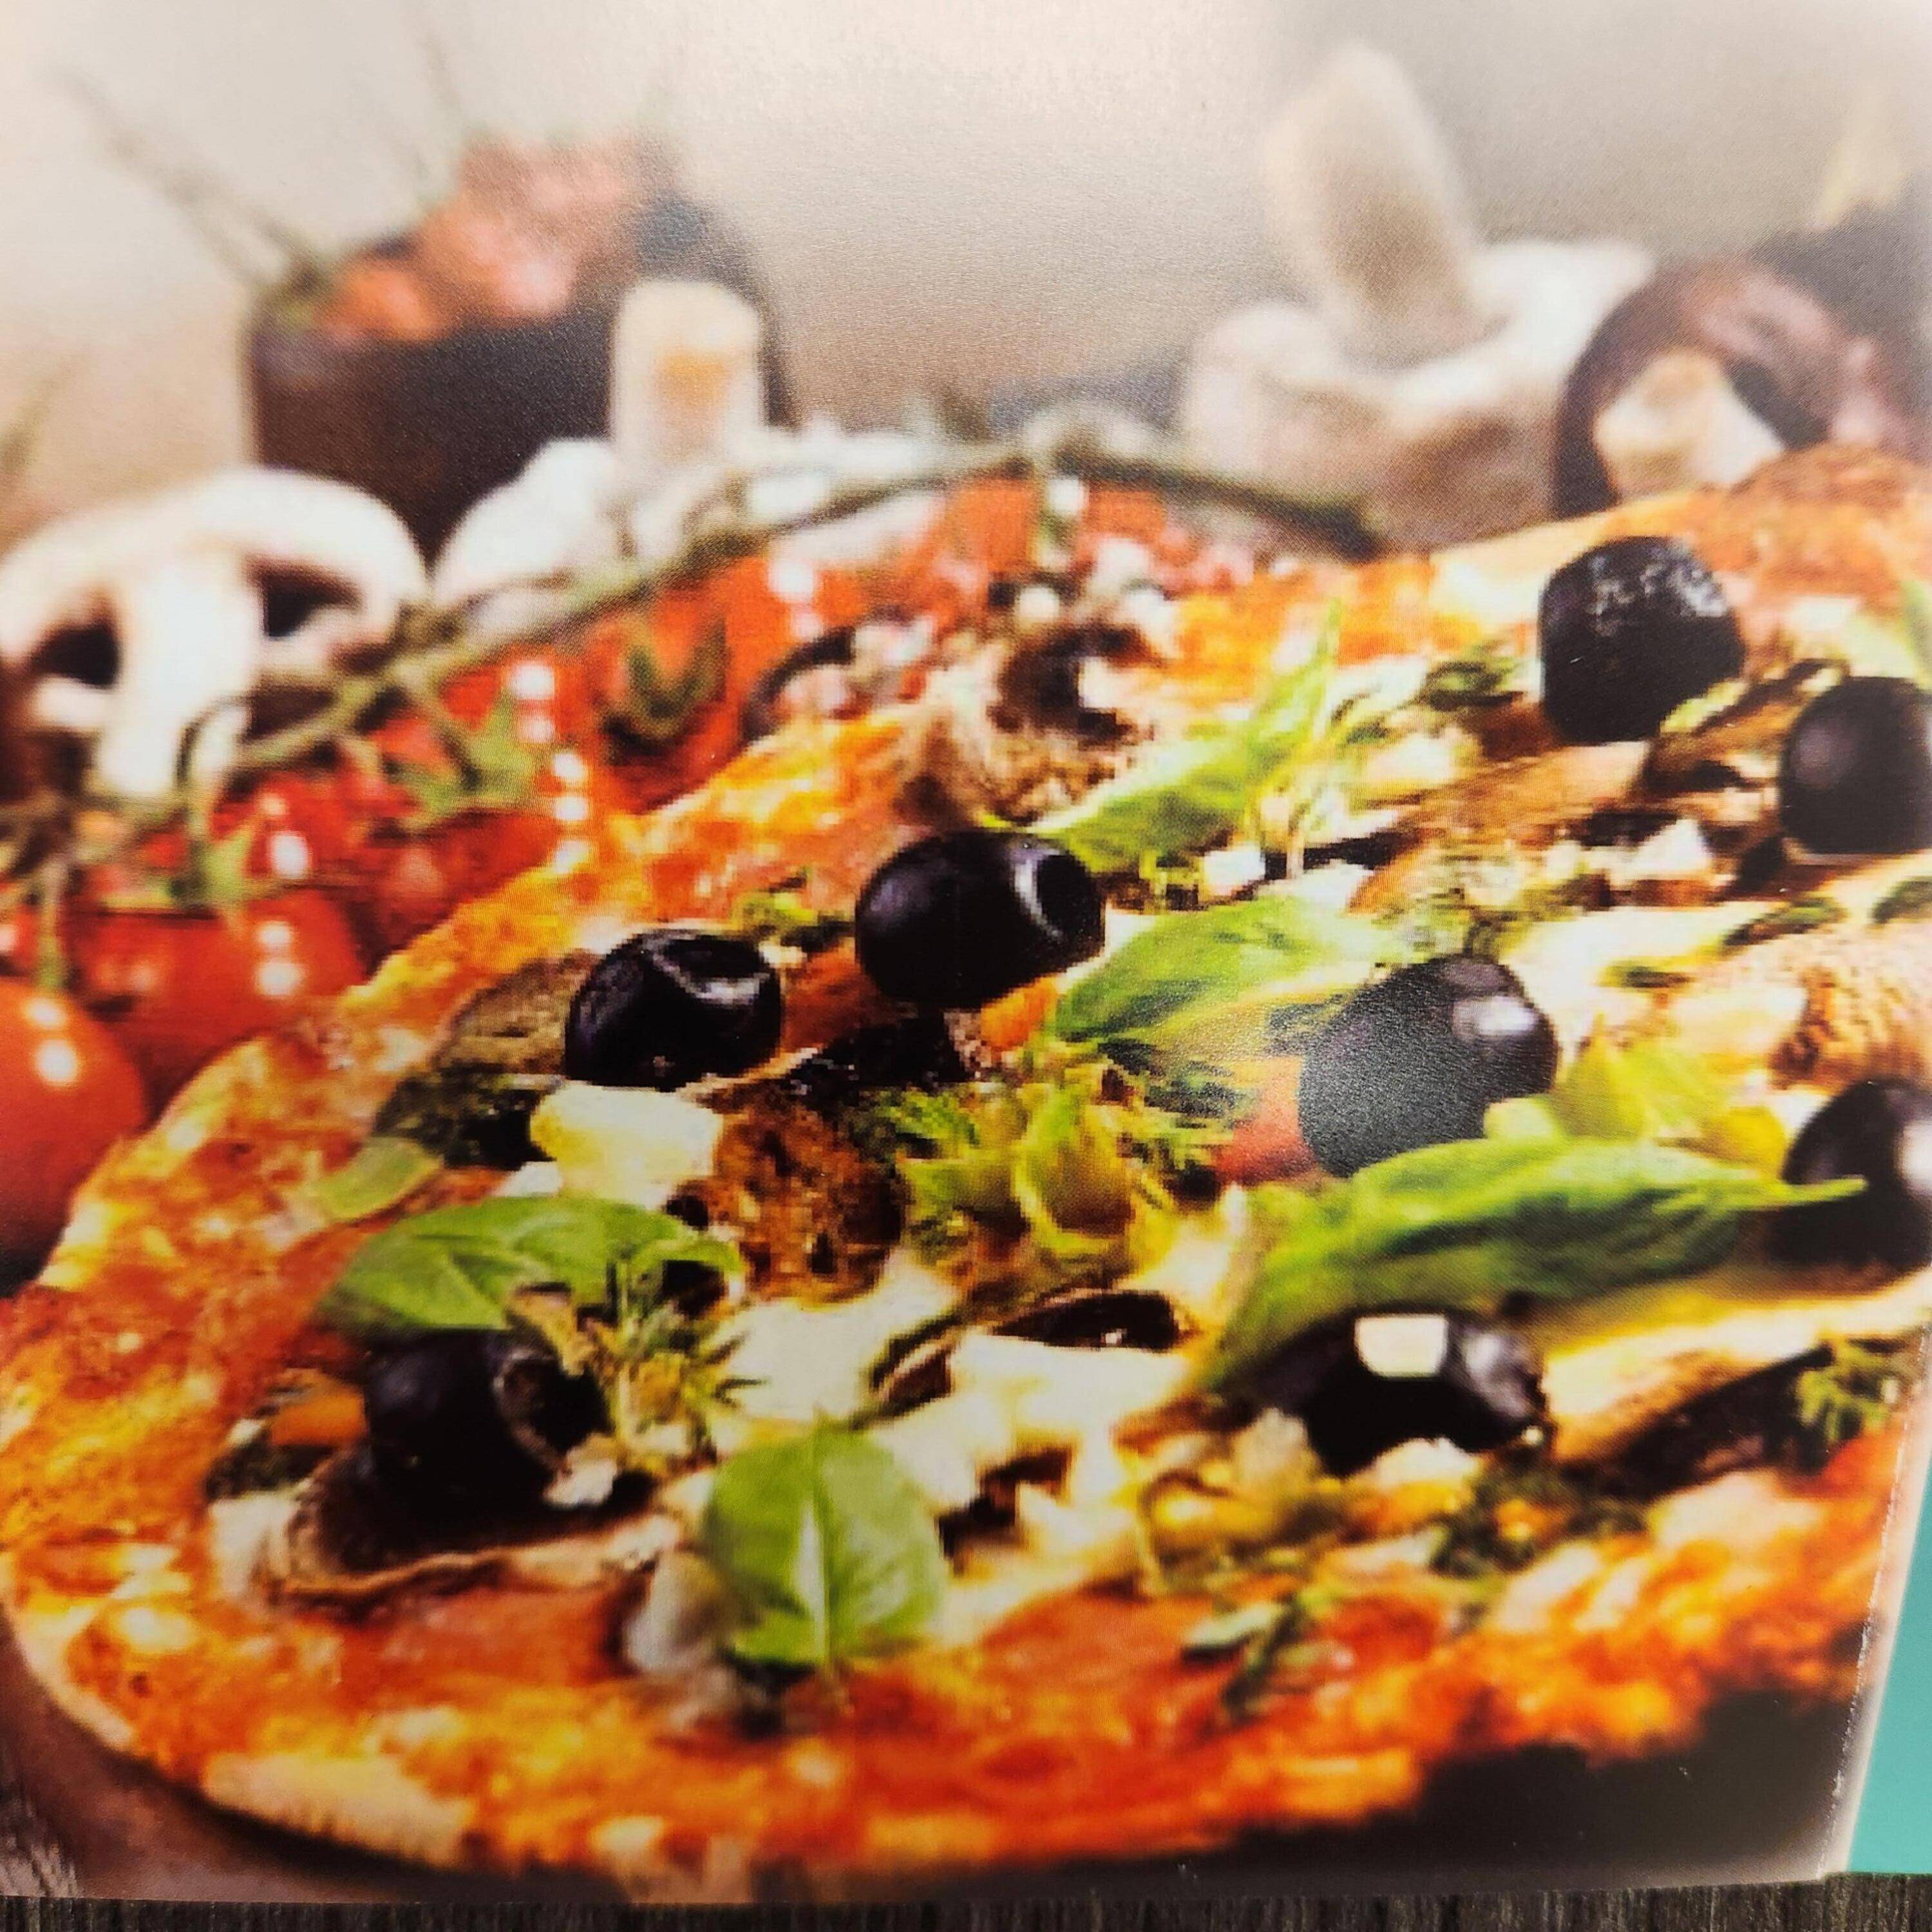 Have a slice of paradise at an established authentic Italian pizza restaurant, the revenues have been consistently growing over the past few years serving nearby affluent communities.